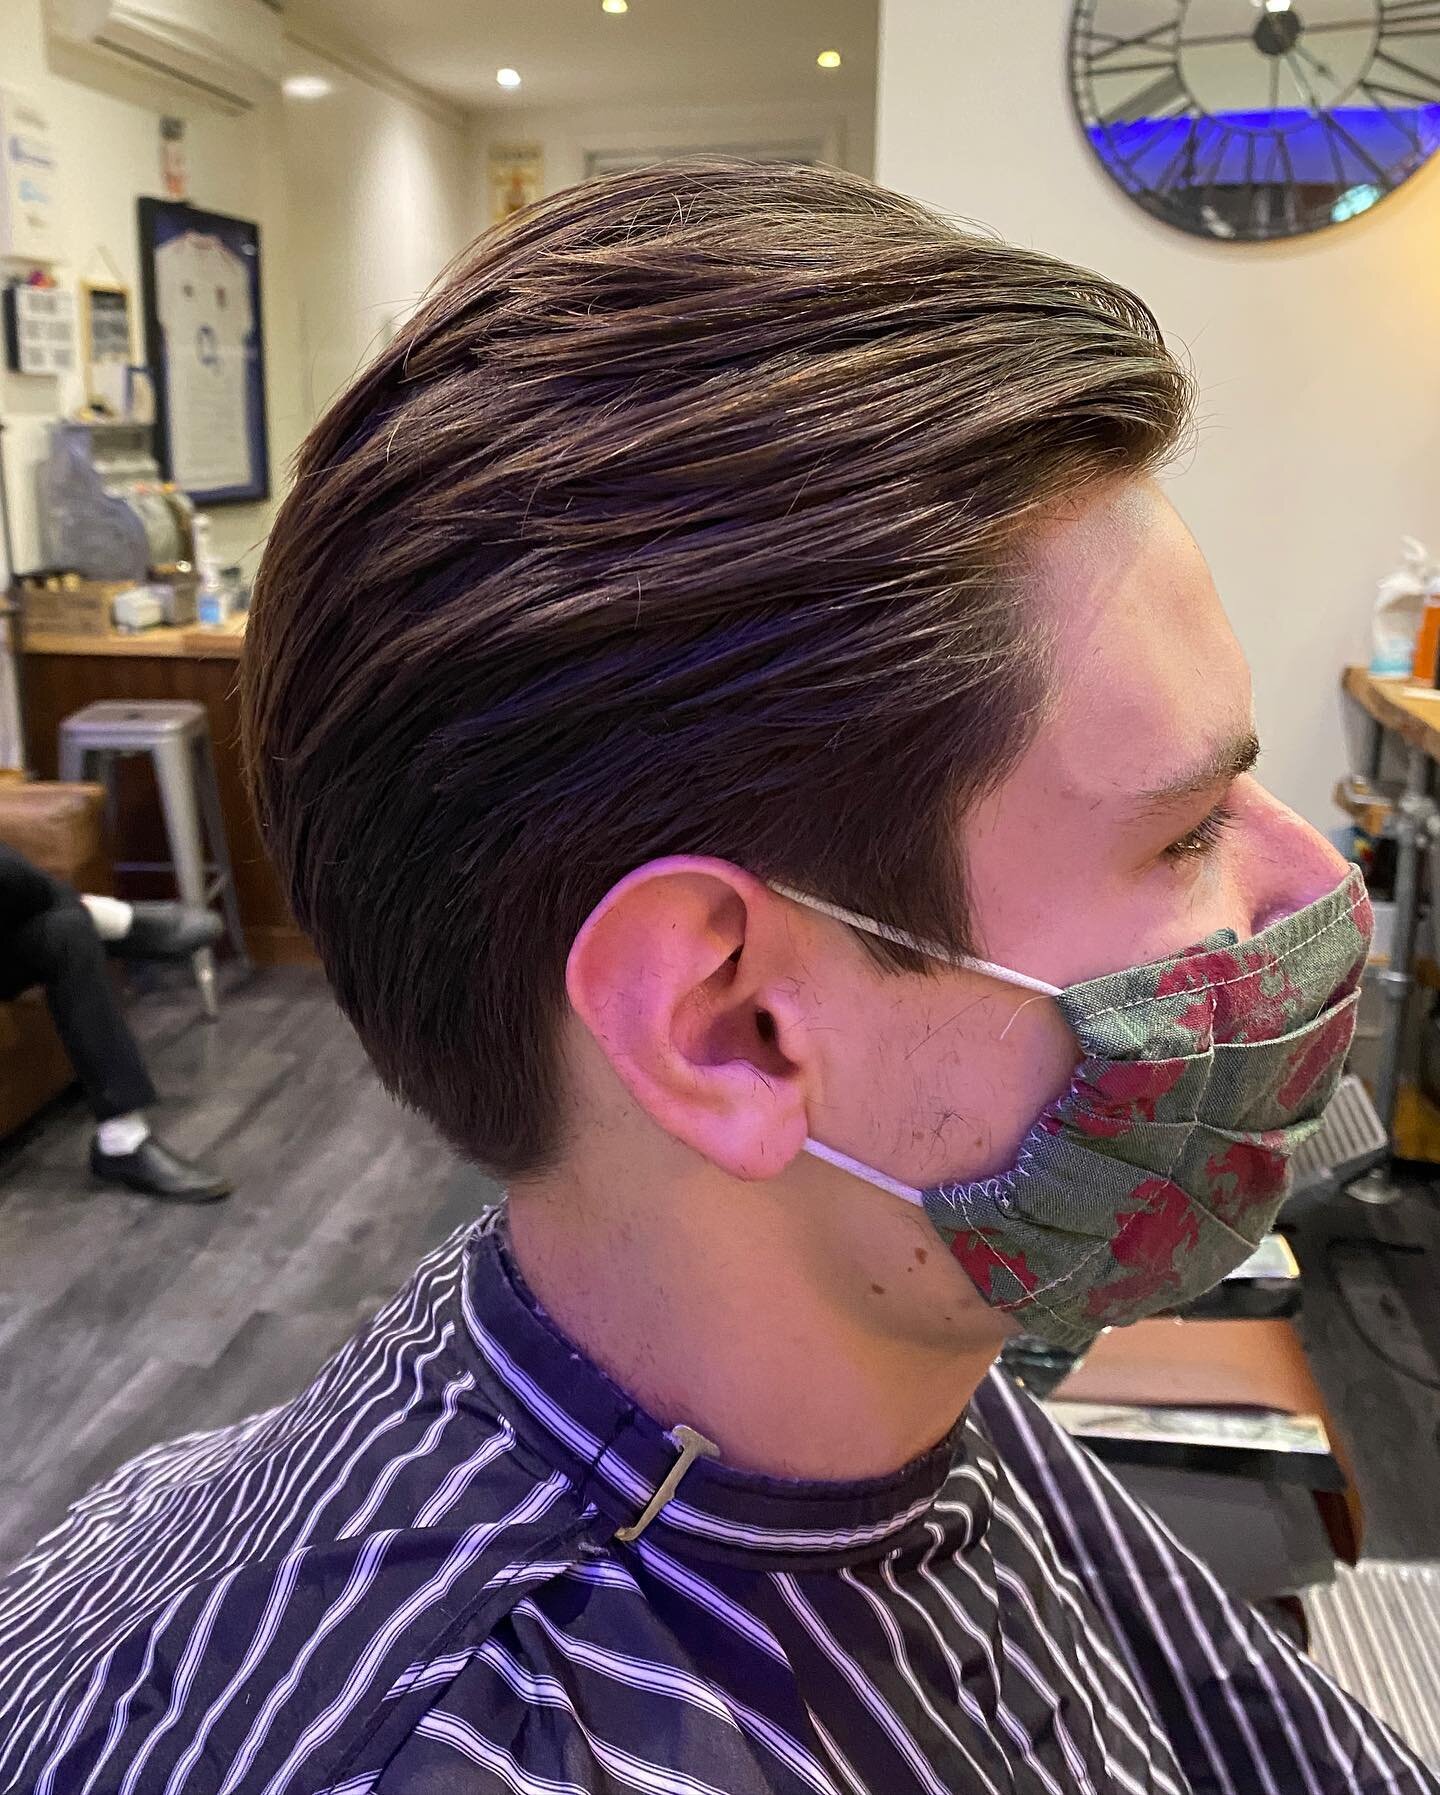 It&rsquo;s not always all about skin fades&hellip;
Head to our website to book yourself in.

#TheFellowshipBarberShop #MapleRoad #Surbiton #Surrey #Kingston #KingstonUponThames #Richmond #Berrylands #Esher #London #BarberGang #BarberLife #BarberLove 